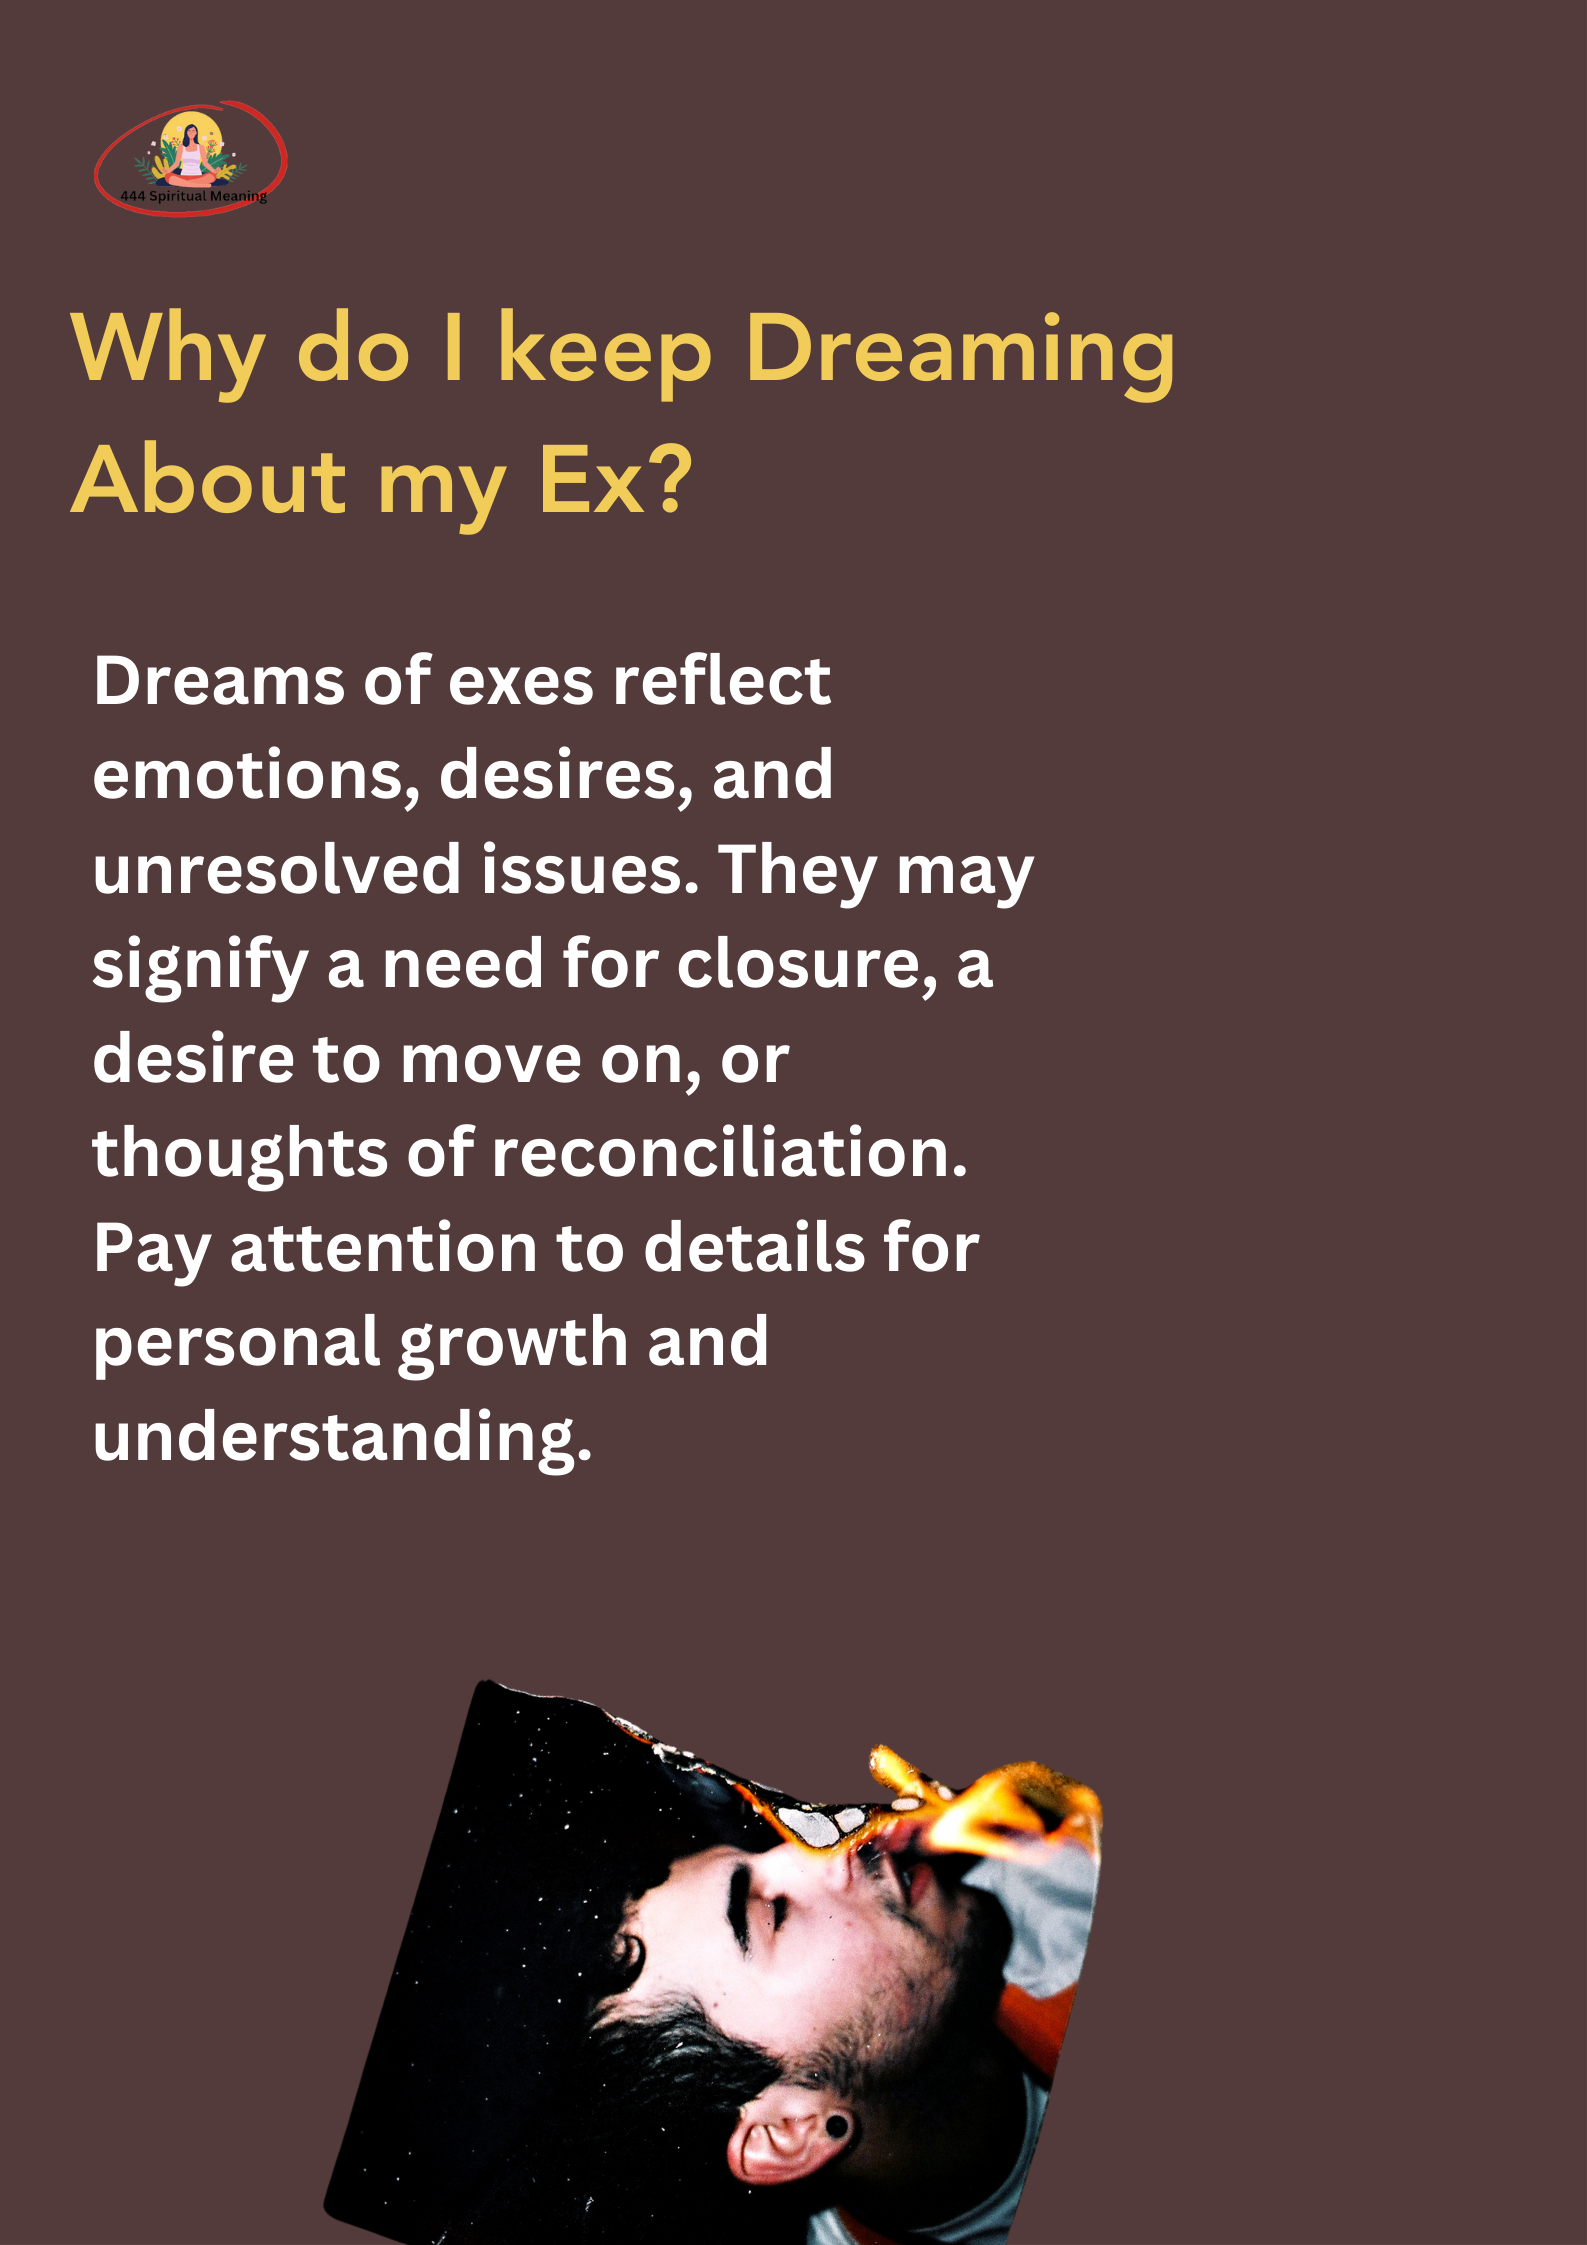 Why do I keep Dreaming About my Ex